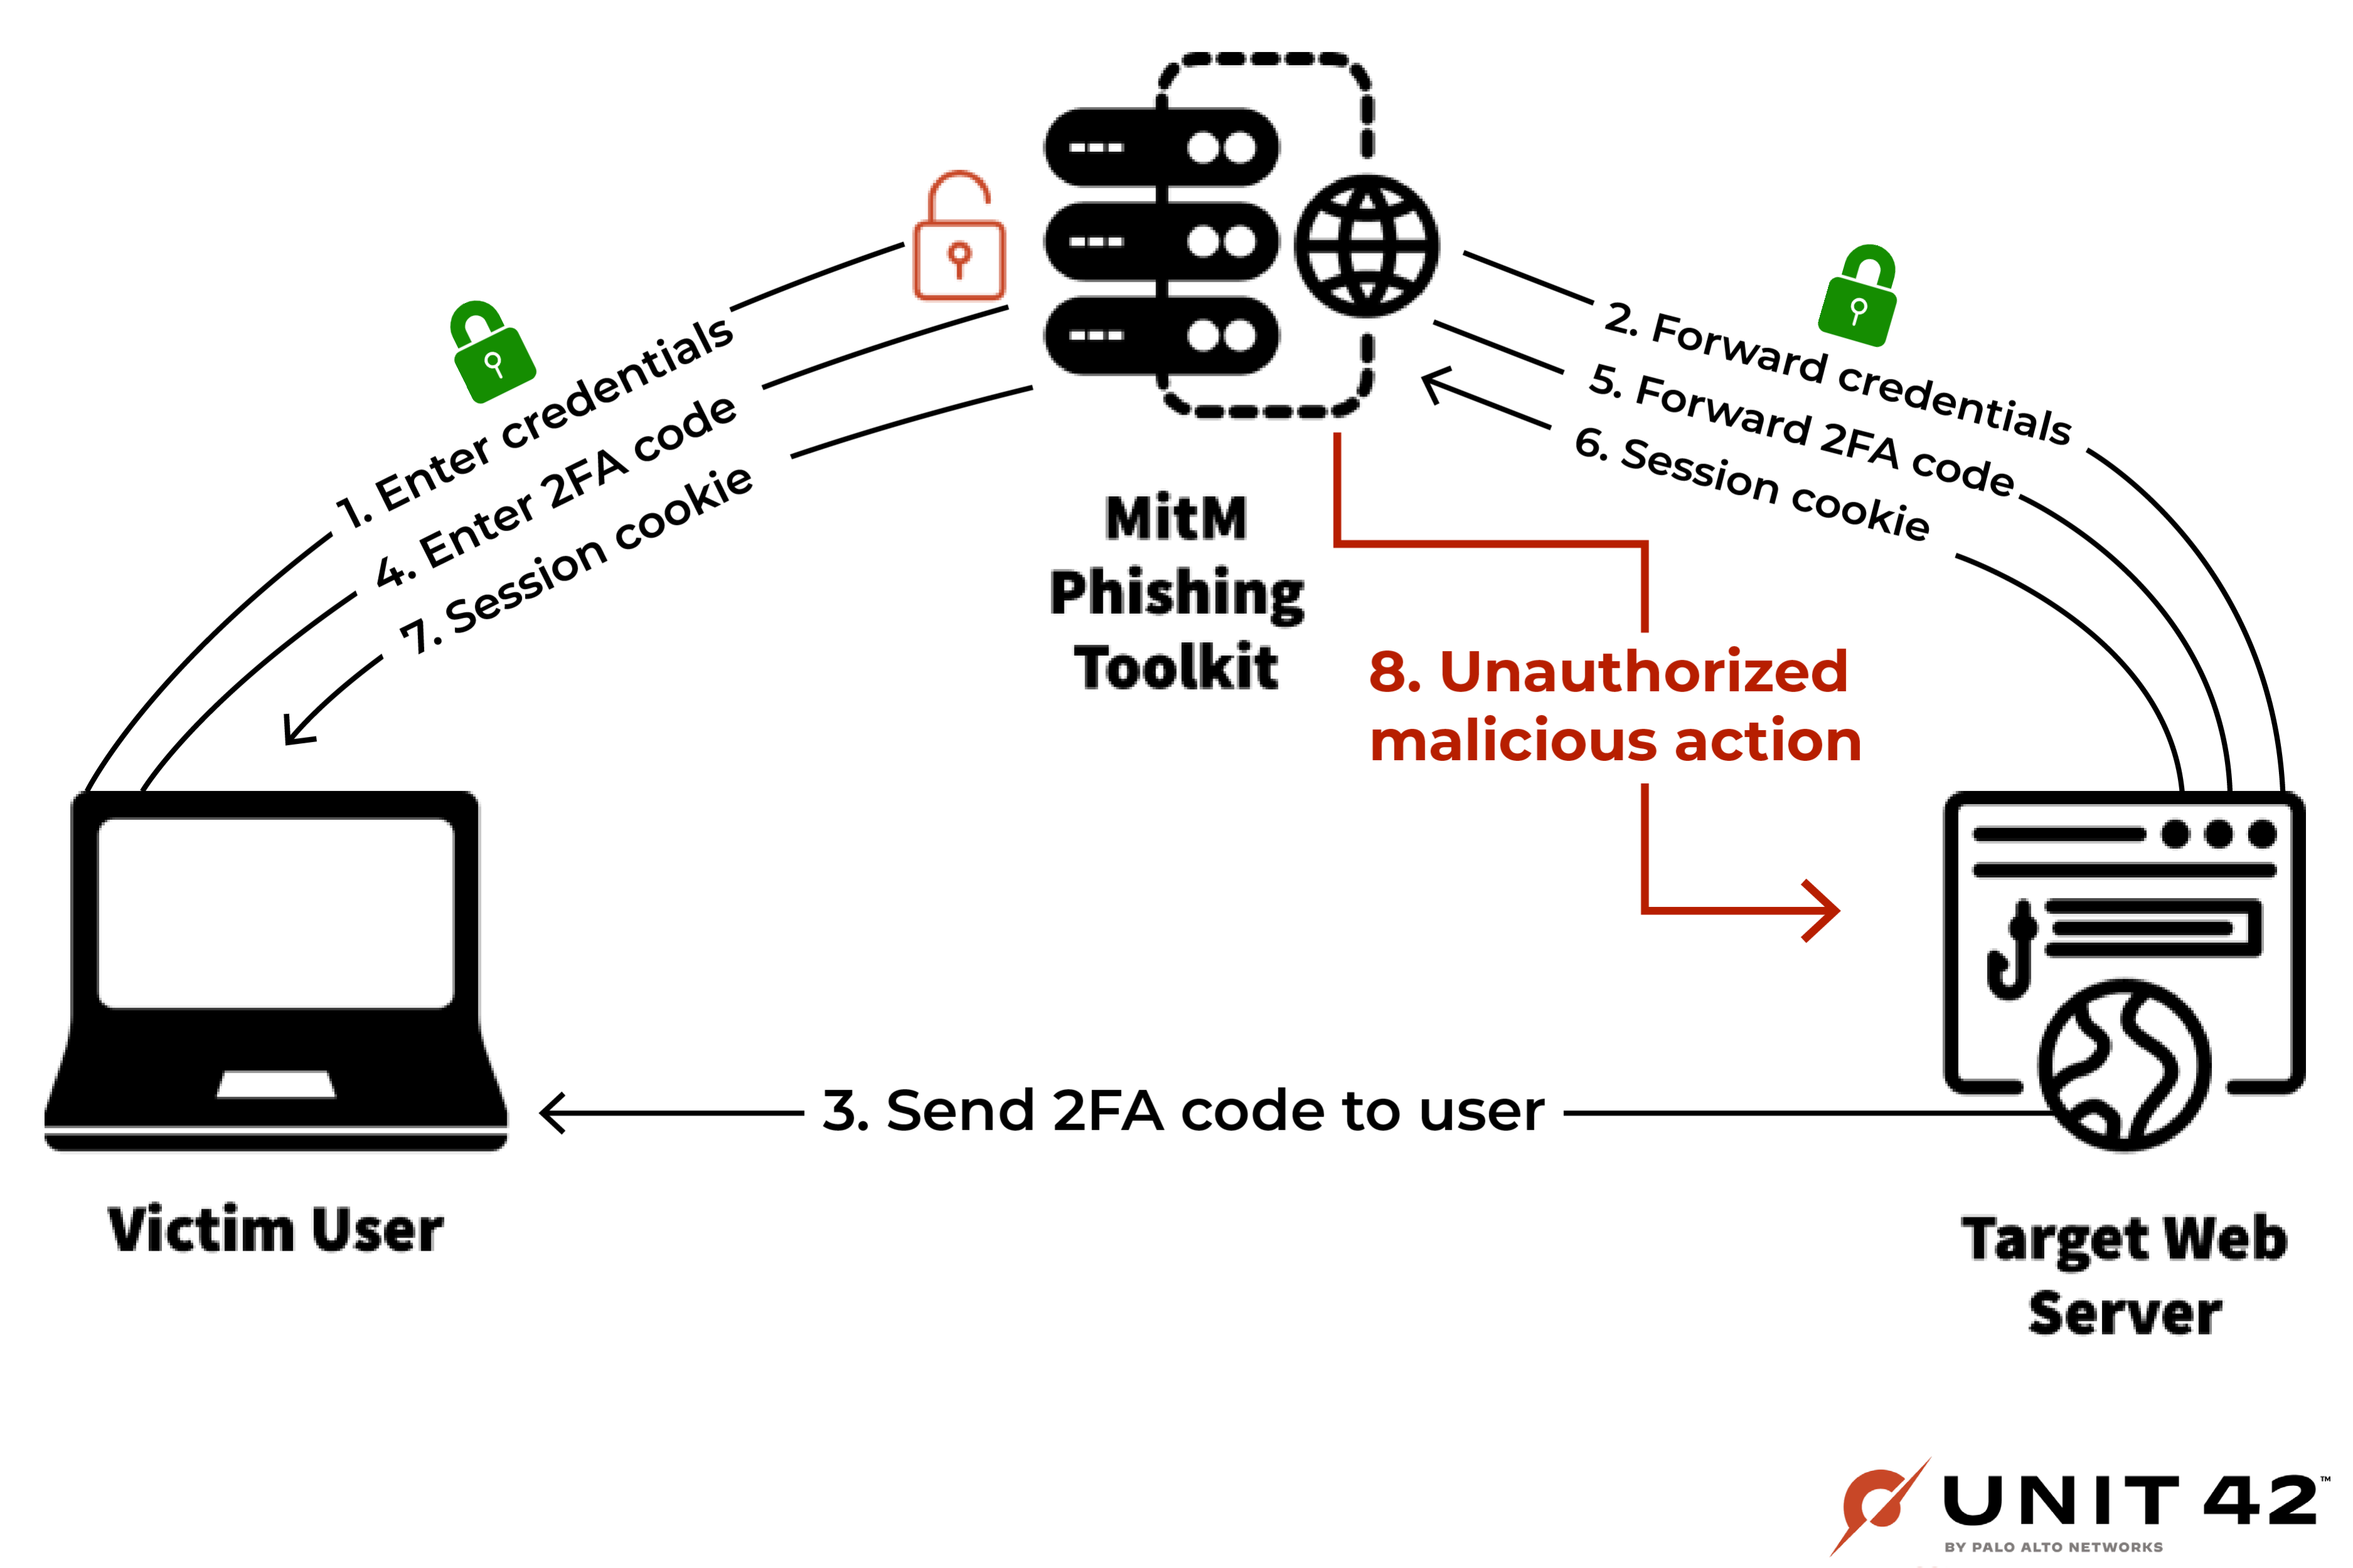 Image 3 is a visual representation of a Meddler-in-the-Middle phishing attack where the victim user is intercepted by the MITM phishing toolkit so the threat actor can then access the target web server. 